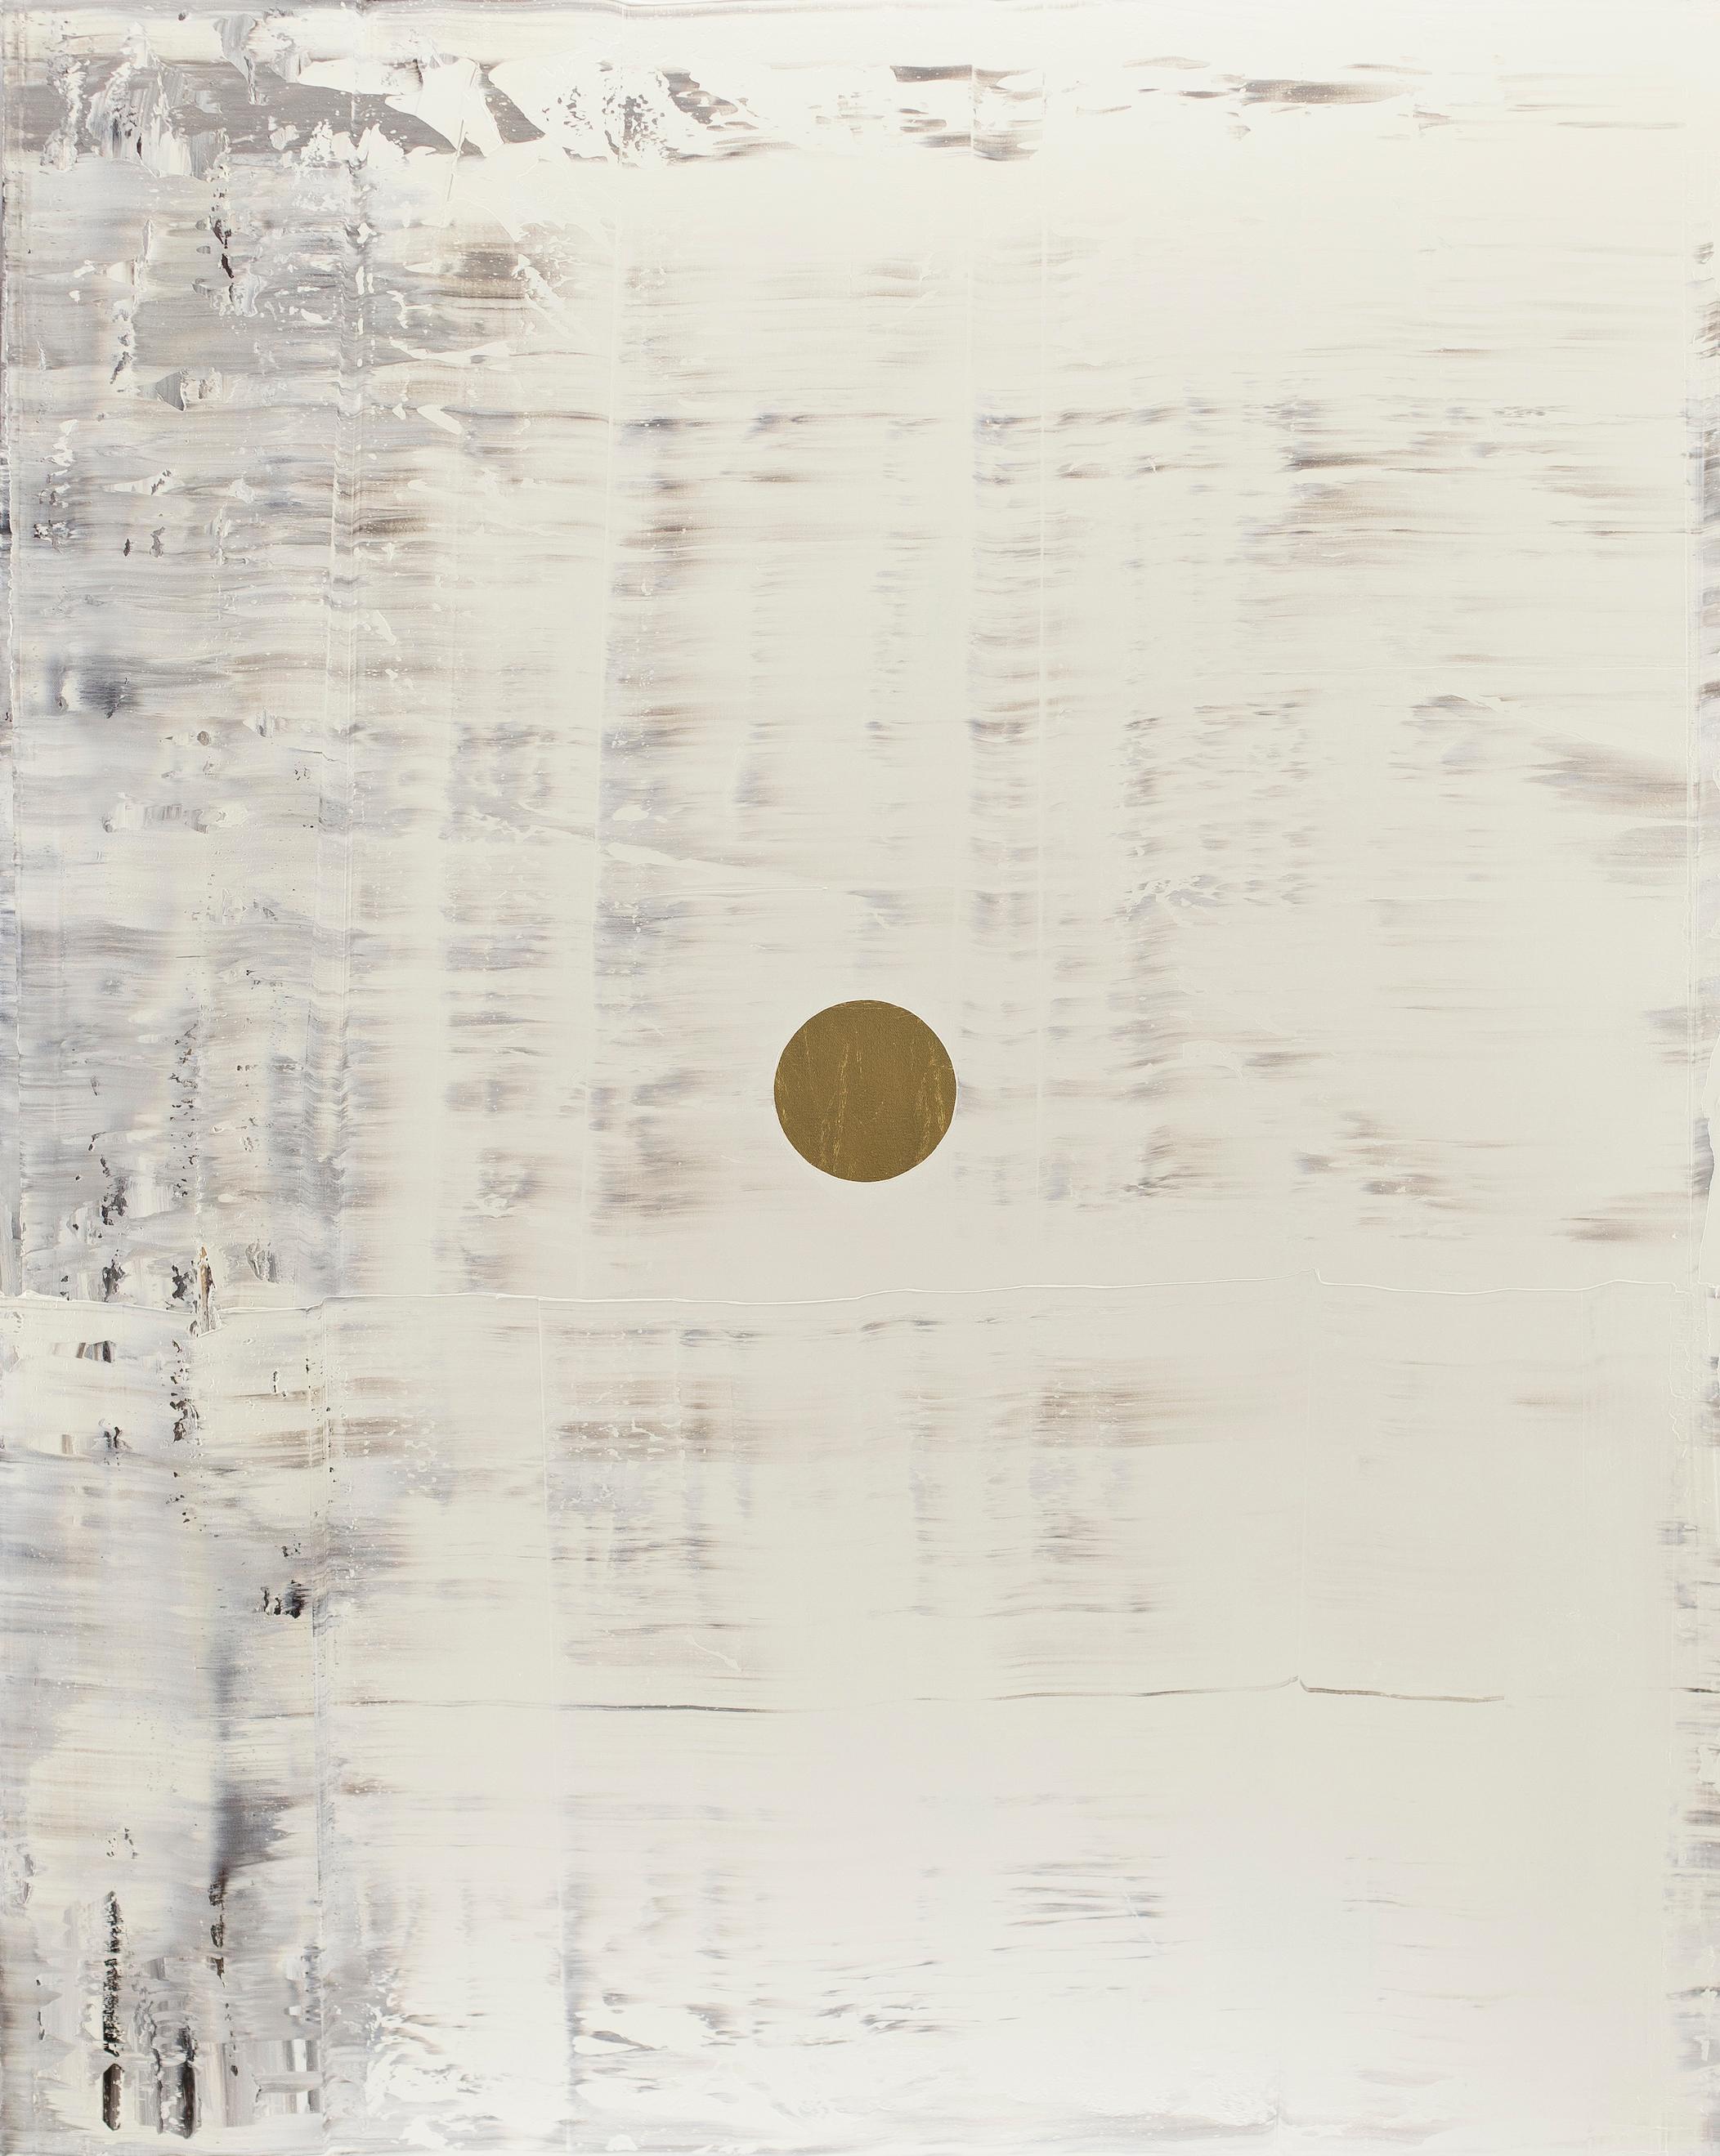 GCW4 - Contemporary - Oil and Gold Leaf on Canvas - Minimal Abstract Painting  - Mixed Media Art by Yuri Figueroa